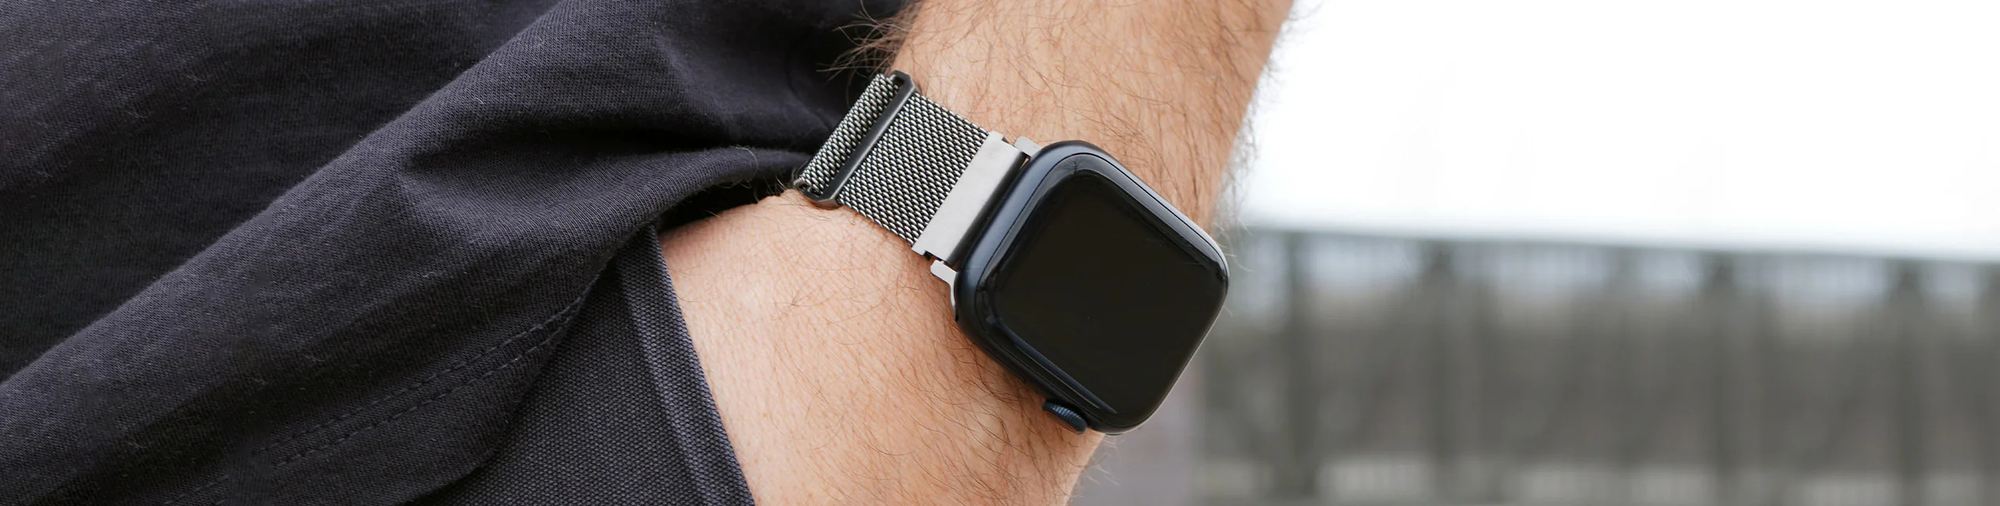 Men’s Bands for Apple Watch